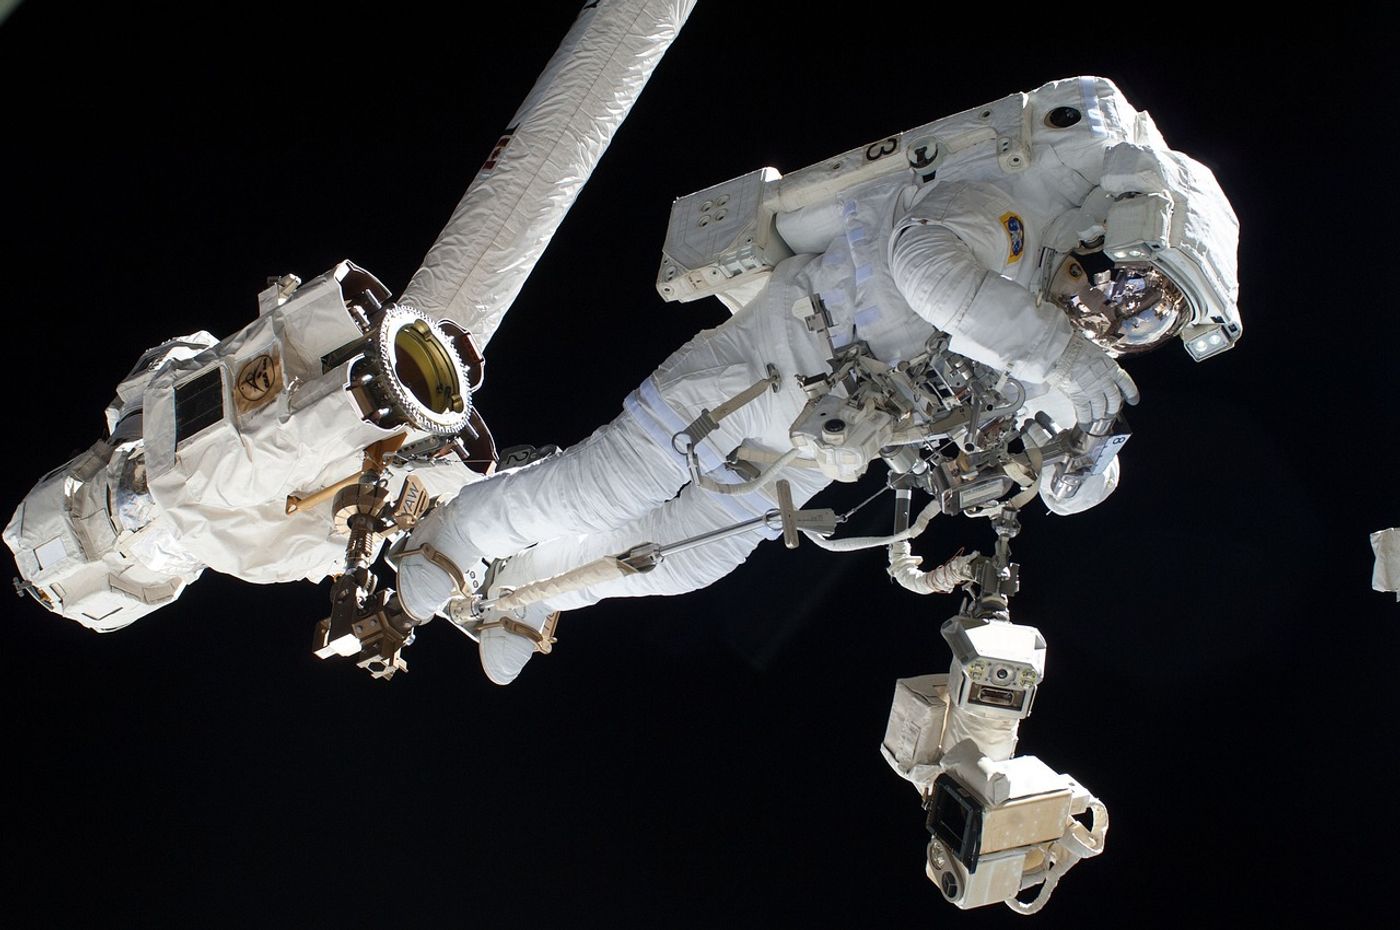 Spacewalks are dangerous, but more so when your safety equipment isn't working right.